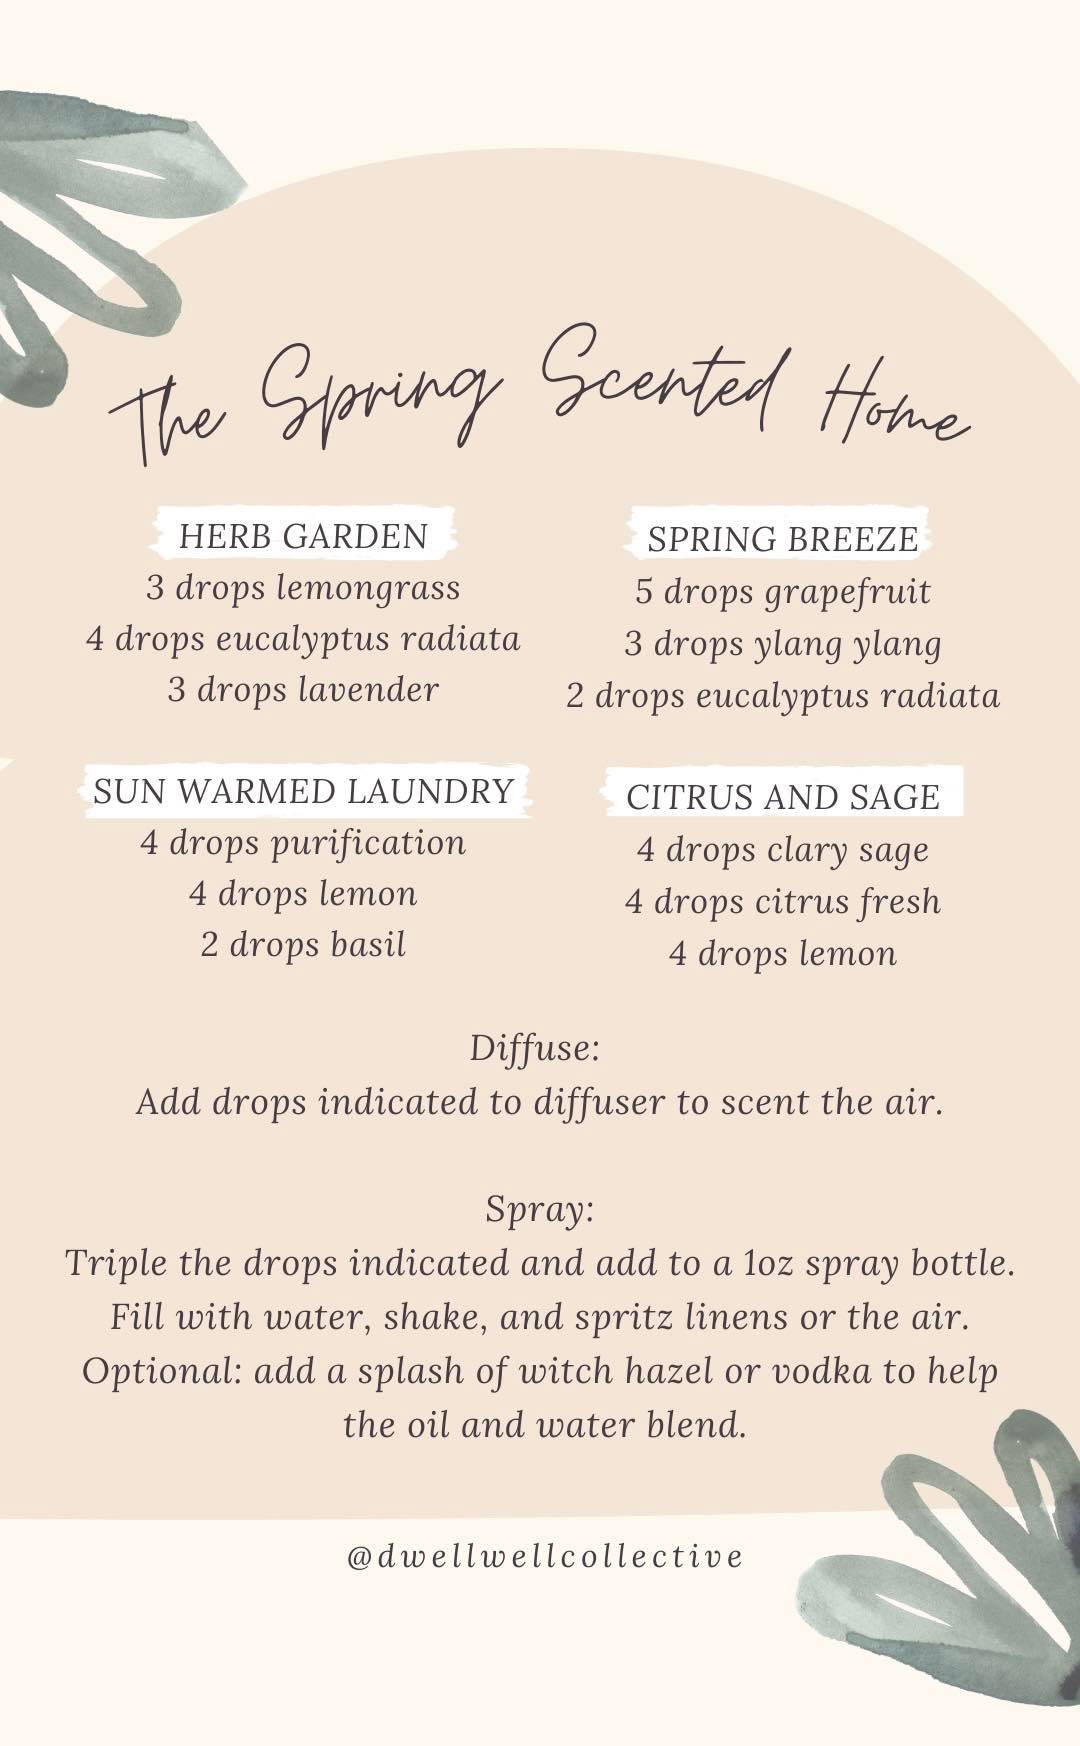 How I'm Making My Home Smell Clean and Pretty for Spring (+ Spring Diffuser Recipes)